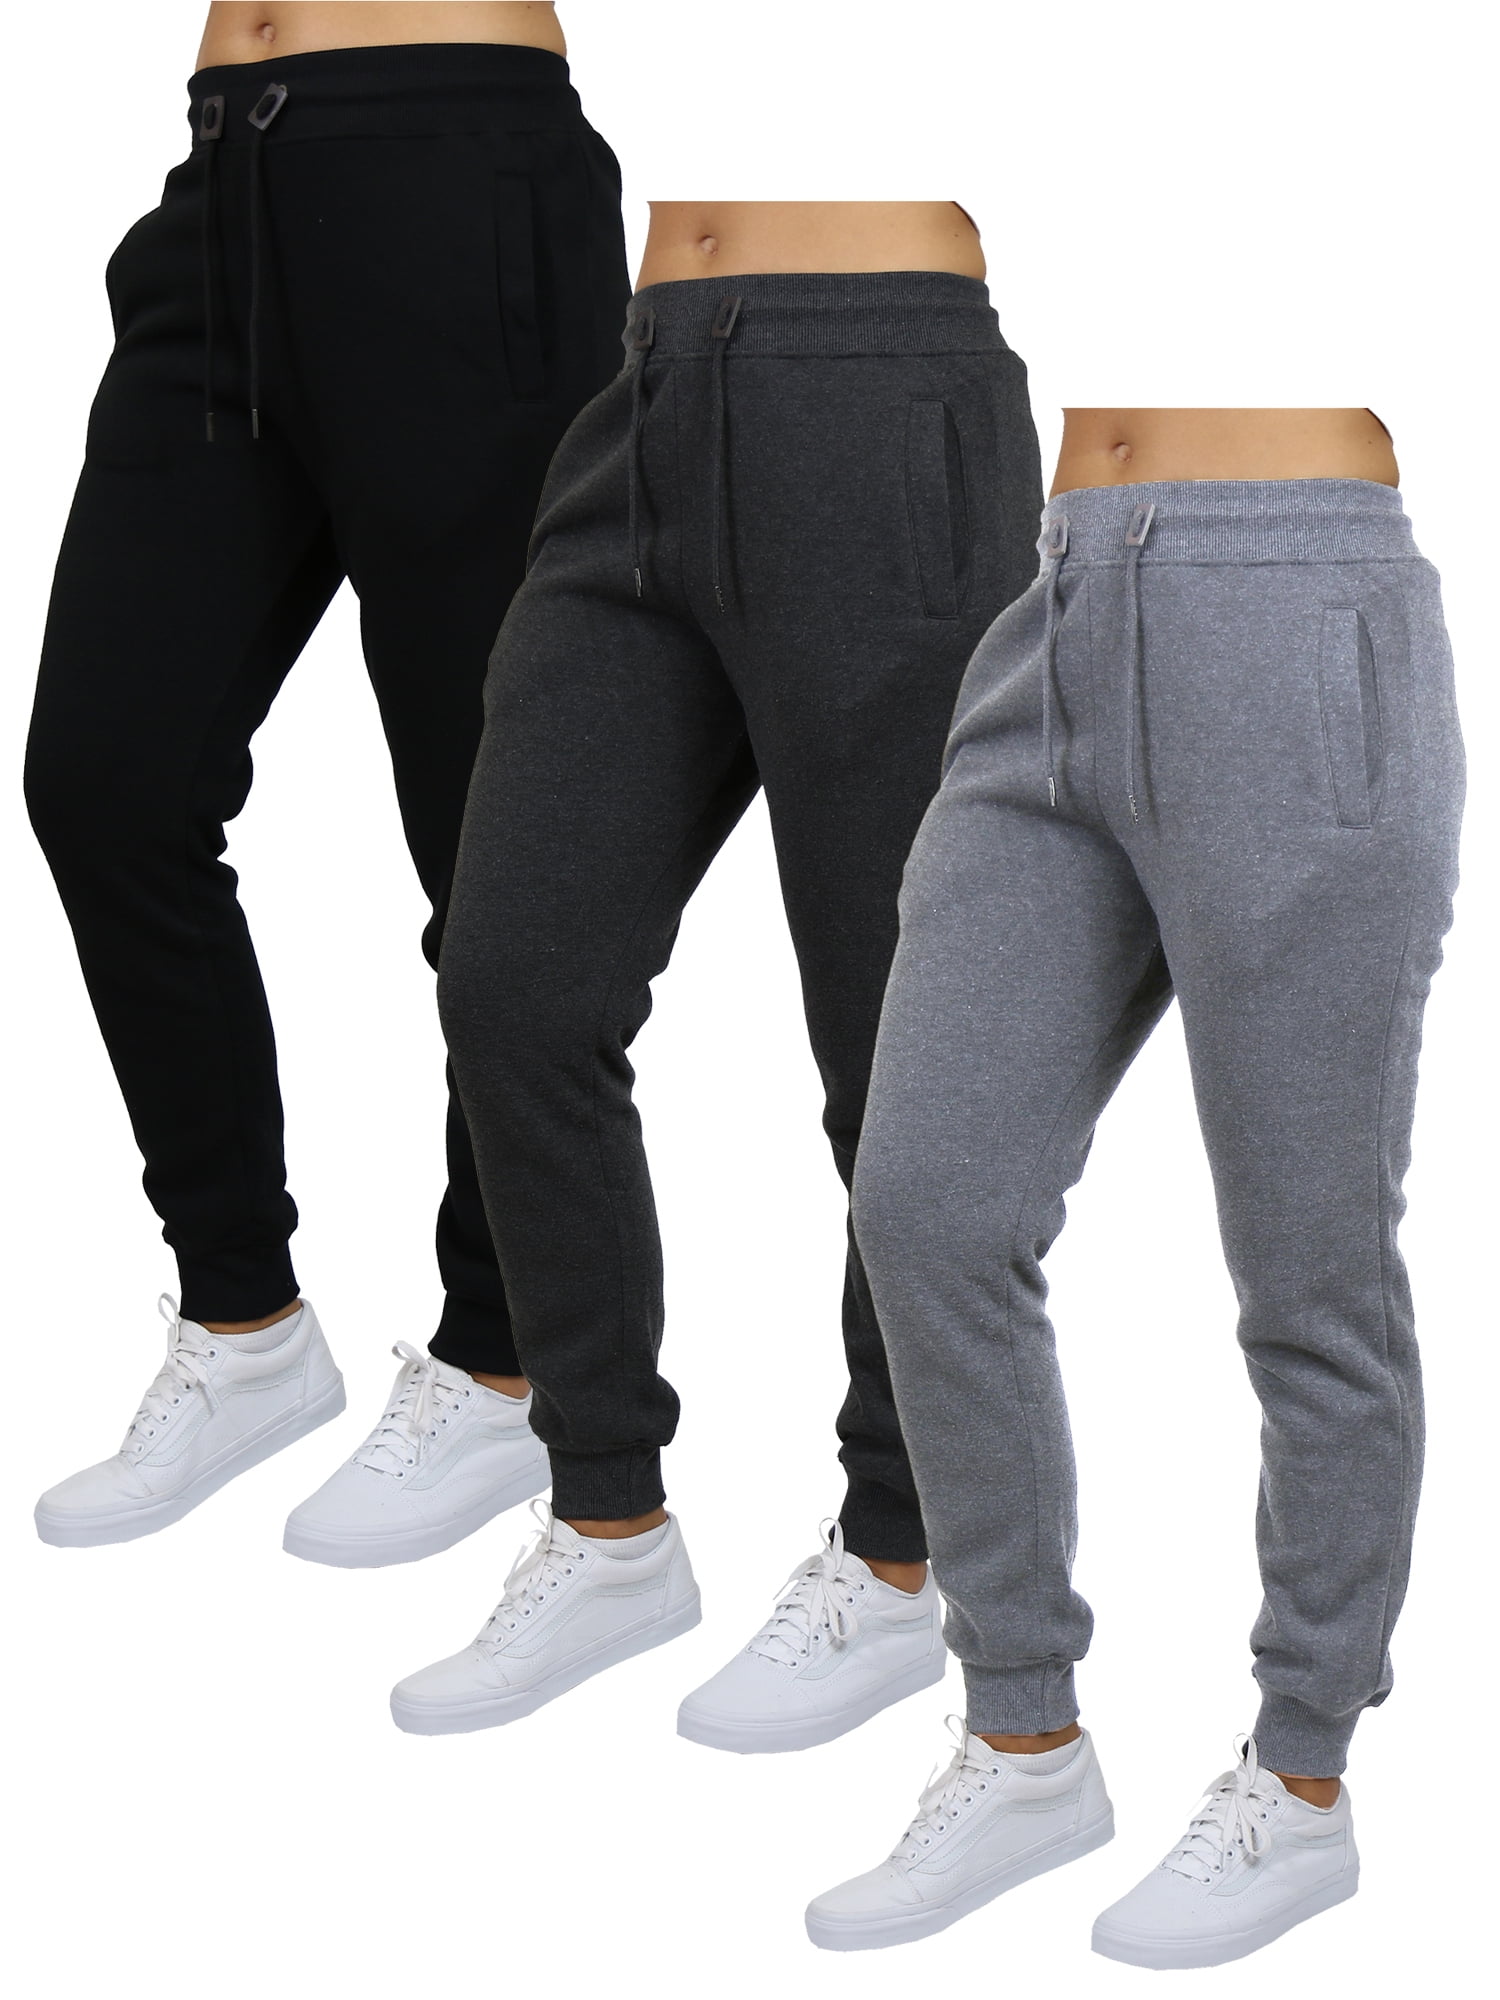  ZERDOCEAN Women's Plus Size Fleece Lined Sweatpants Relaxed Fit  Workout Athletic Jogger Fleece Pants Gray 1X : Clothing, Shoes & Jewelry